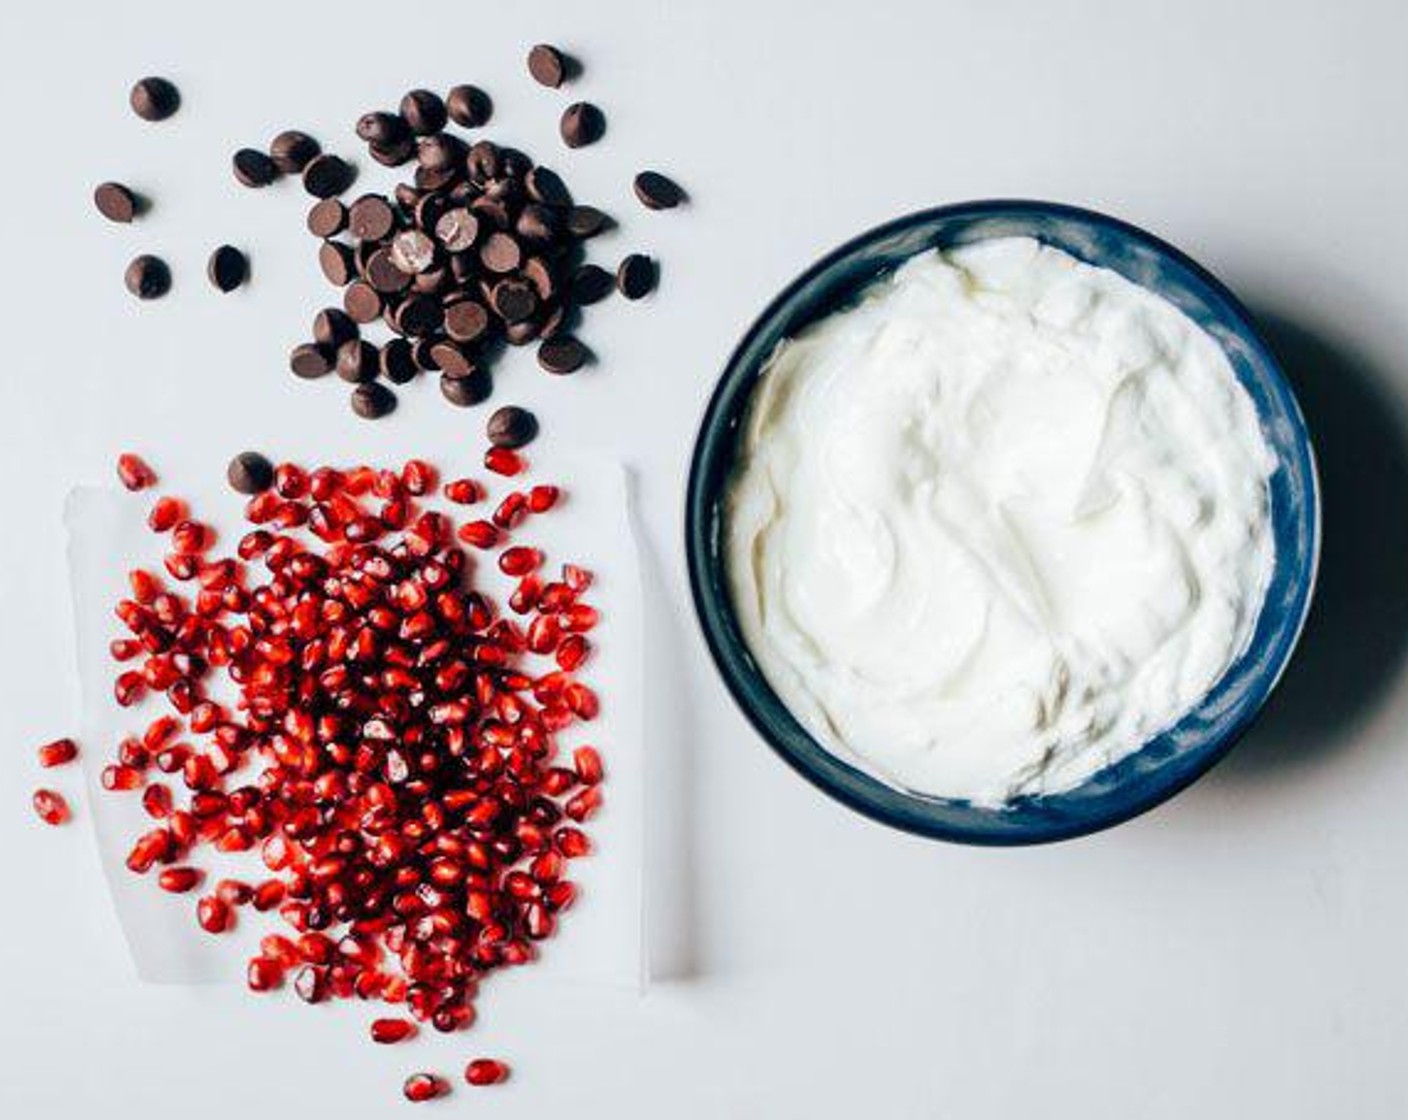 step 1 Into the Greek Yogurt (2 cups), mix the Pomegranate Seeds (1/4 cup) and Dark Chocolate Chips (2 Tbsp). Add Caster Sugar (1 Tbsp) if needed.